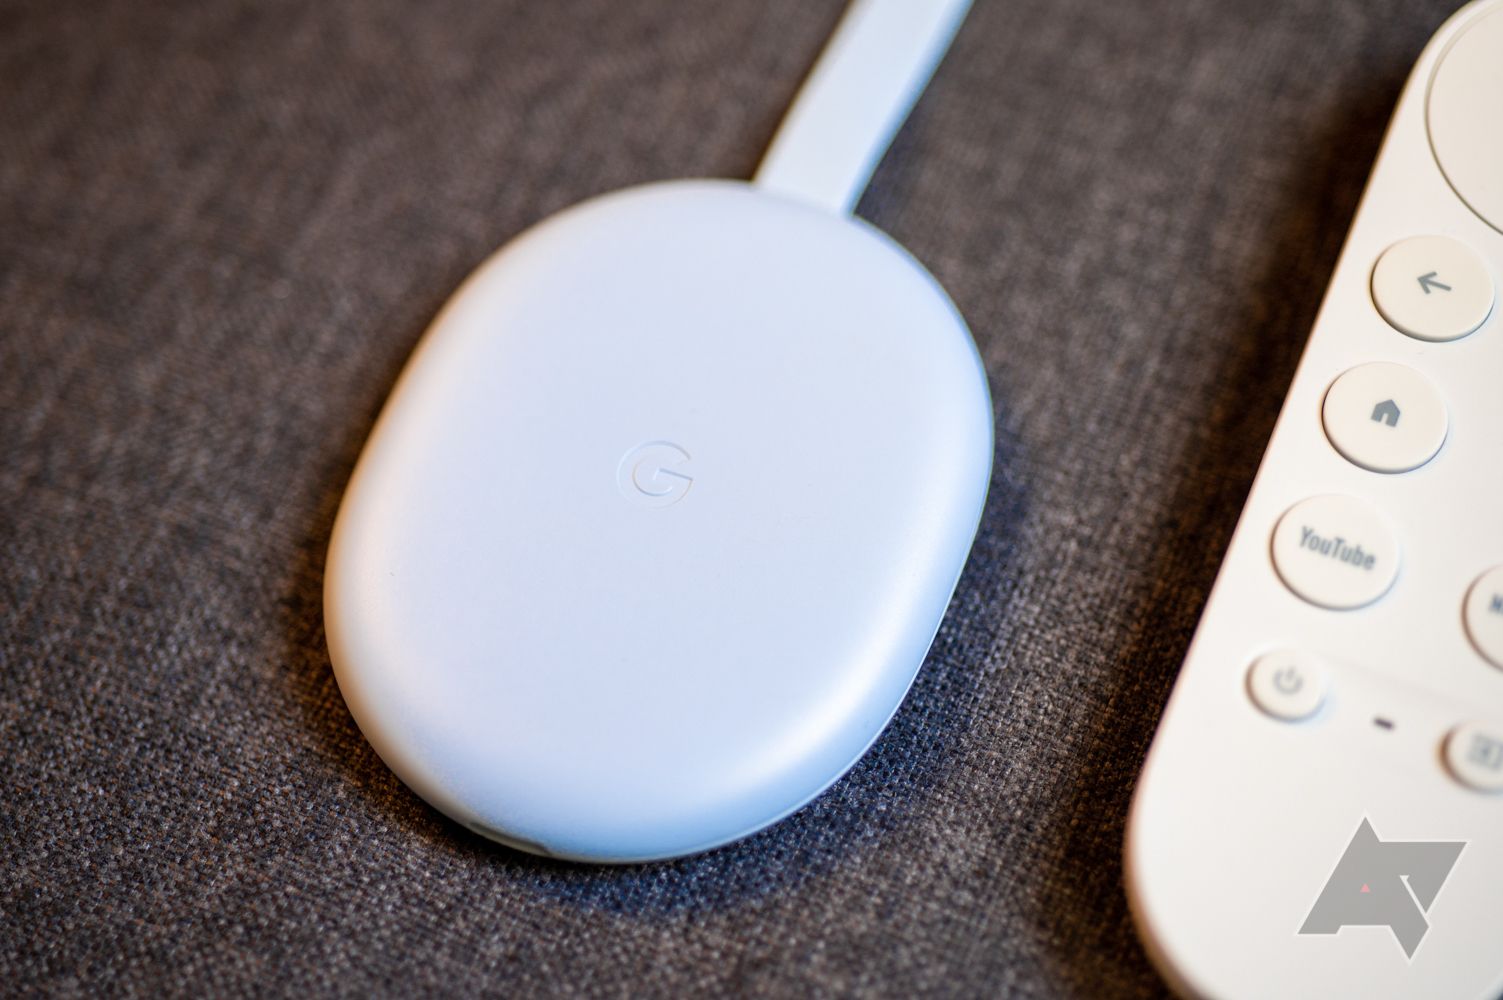 7 common Google Chromecast issues and how to fix them